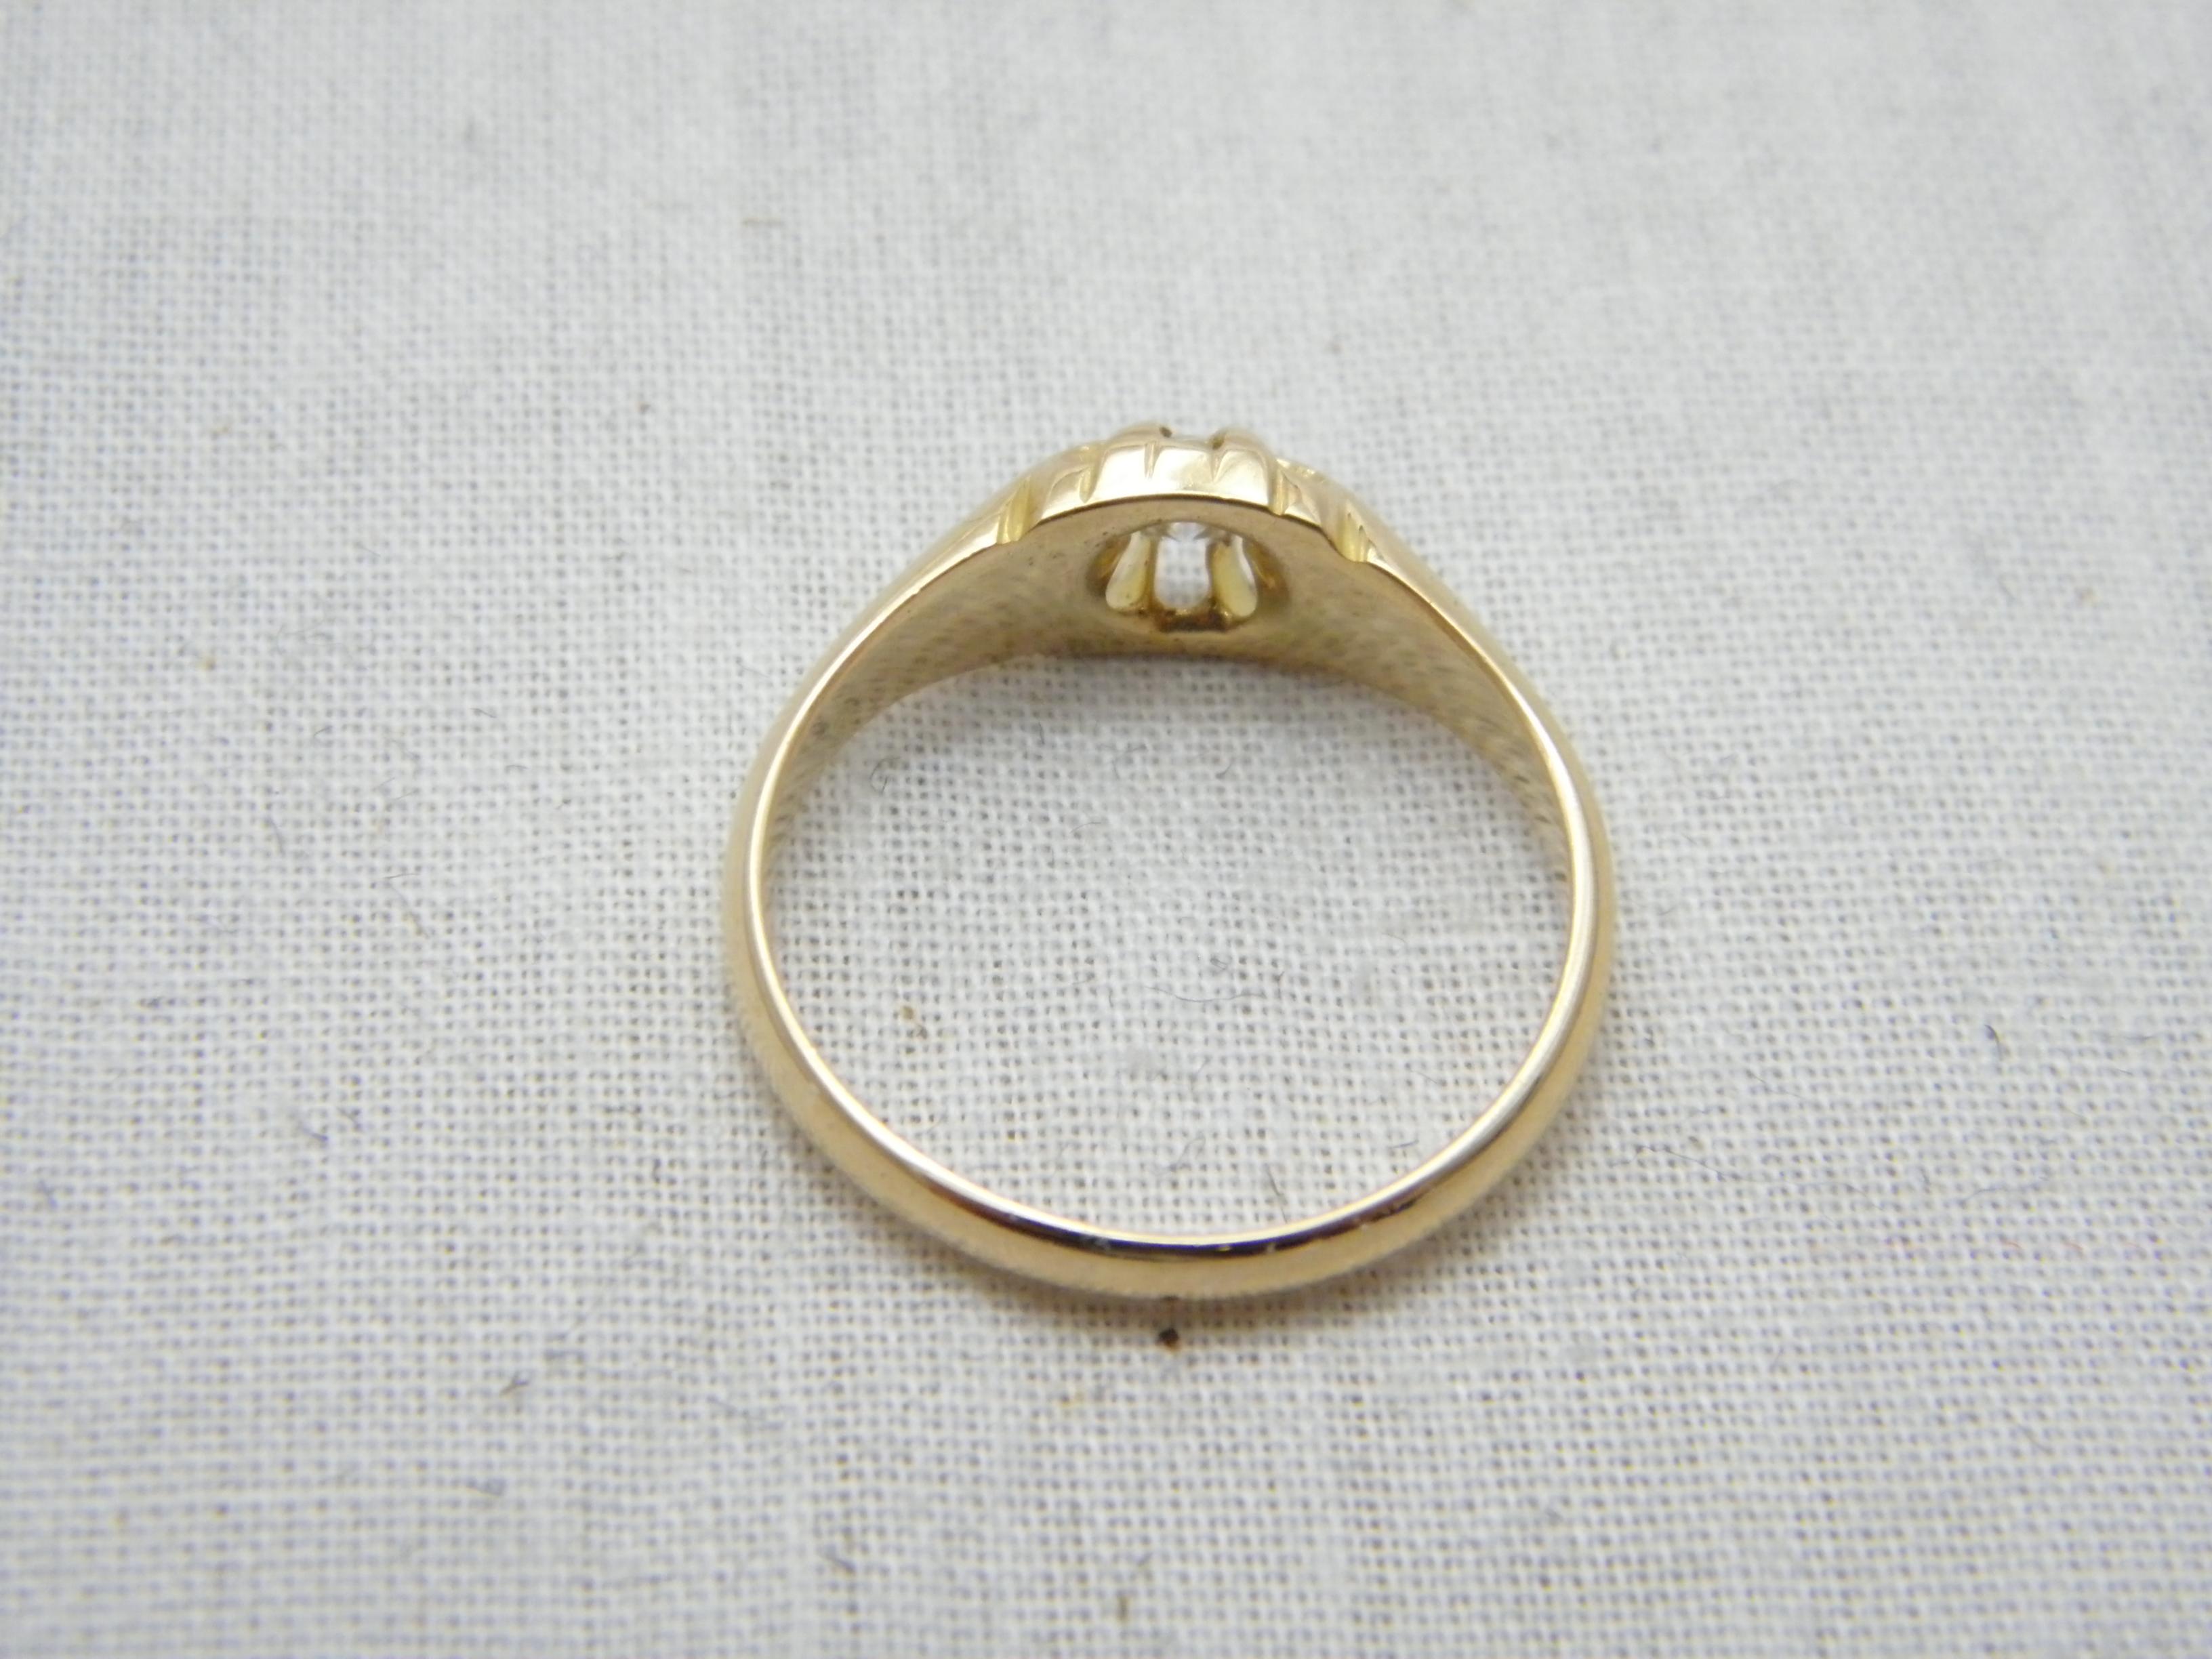 Victorian Antique 18ct Gold 0.33Cttw Diamond Solitaire Gypsy Ring Size N 6.75 750 Purity For Sale